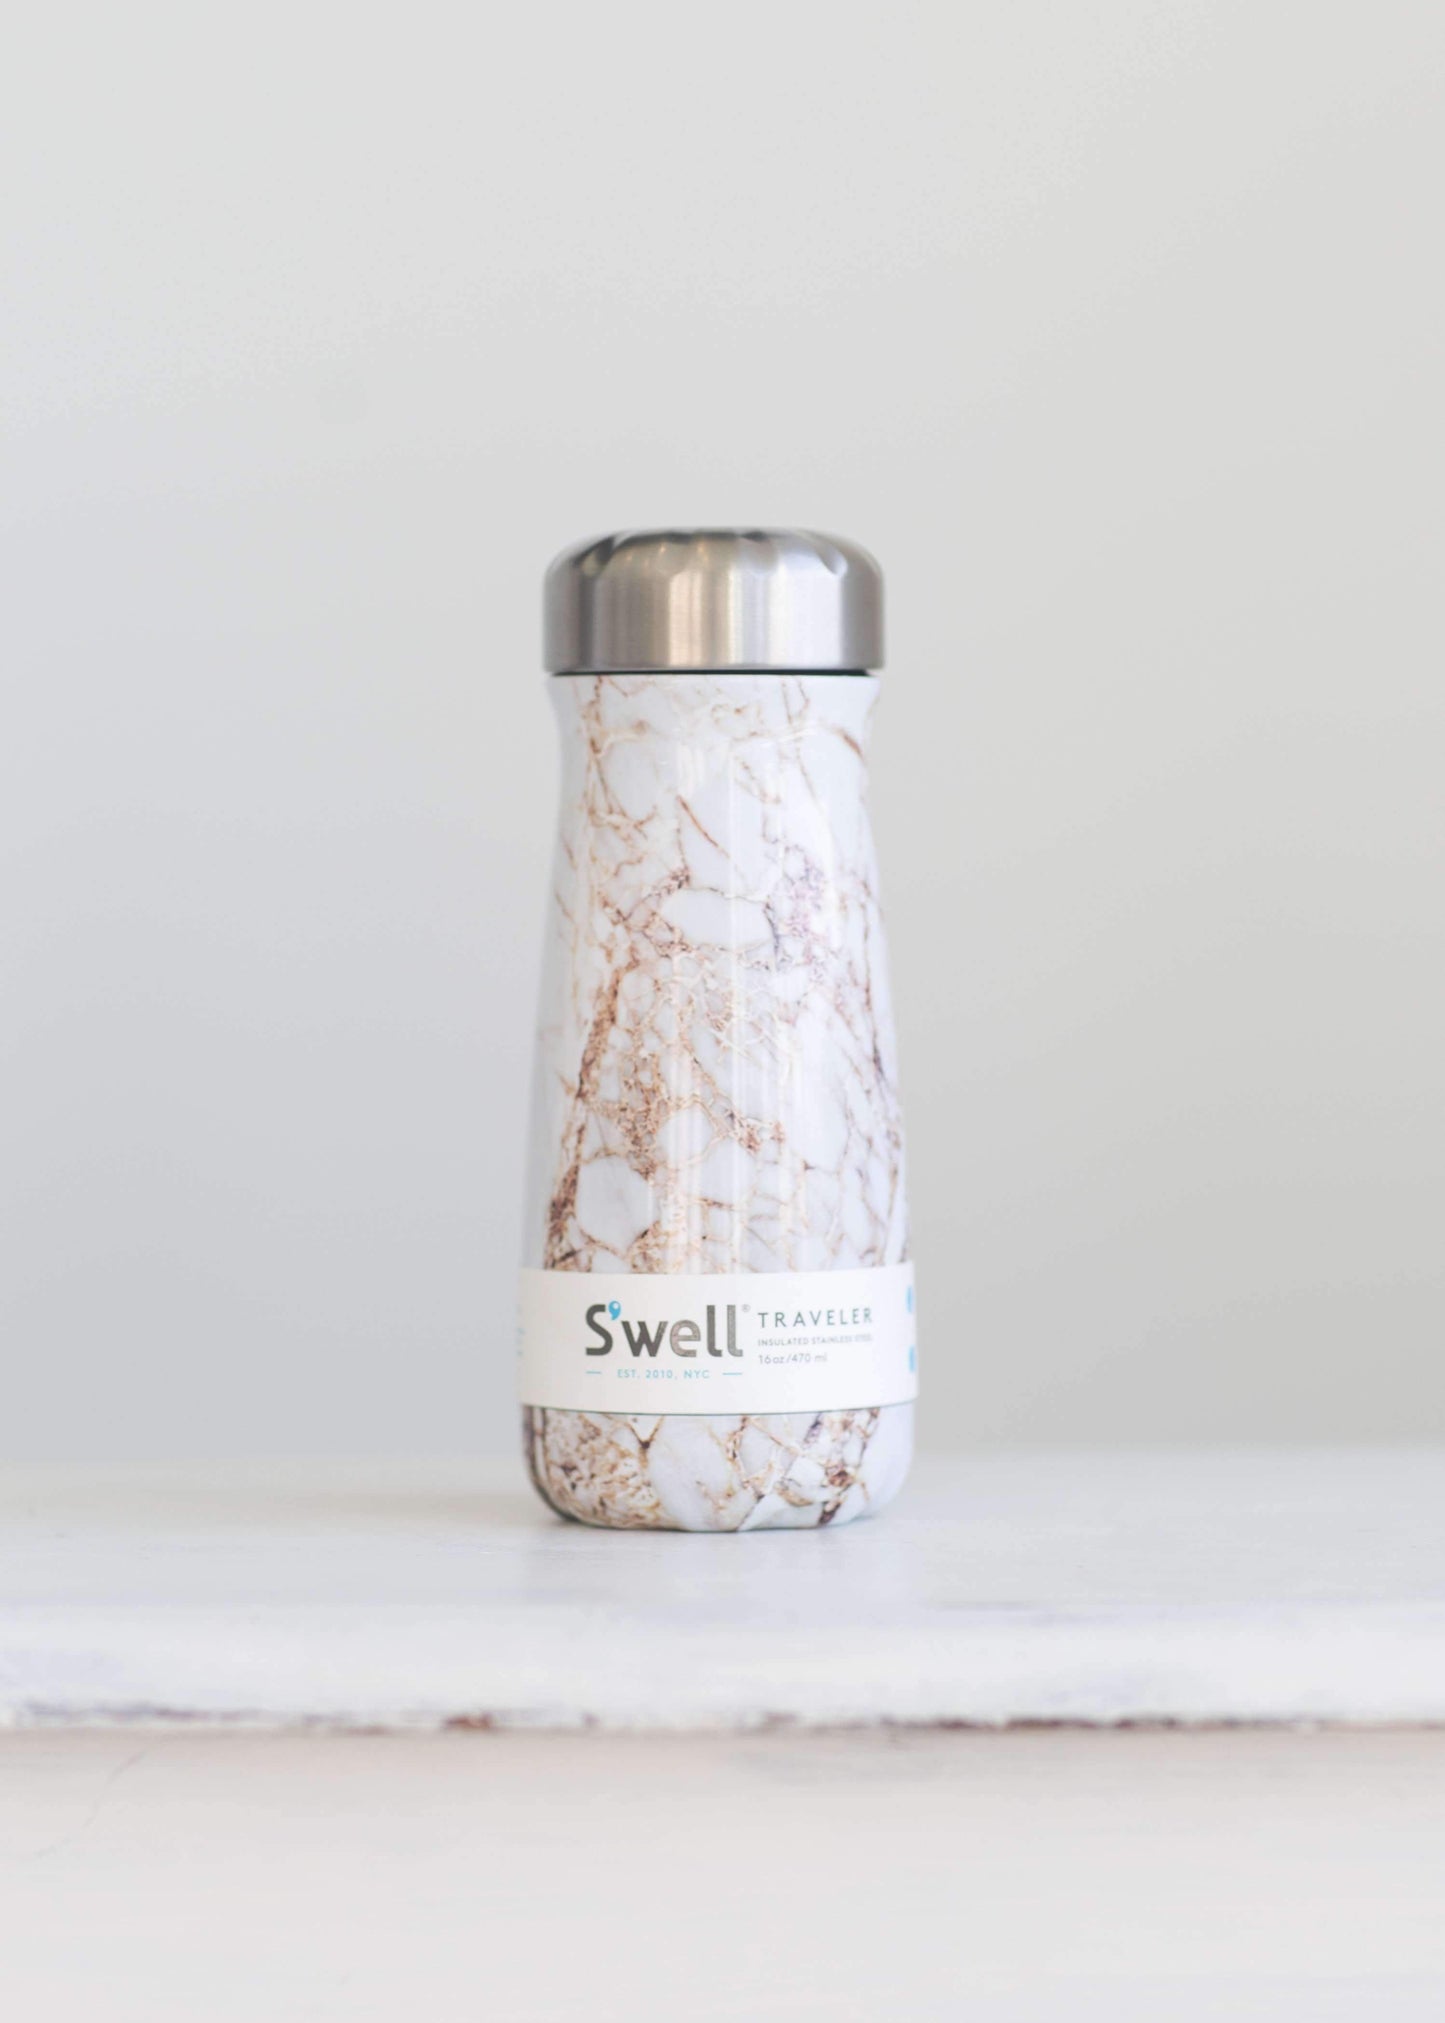 S'well water bottle in a gold and marble design and holds 16 oz.